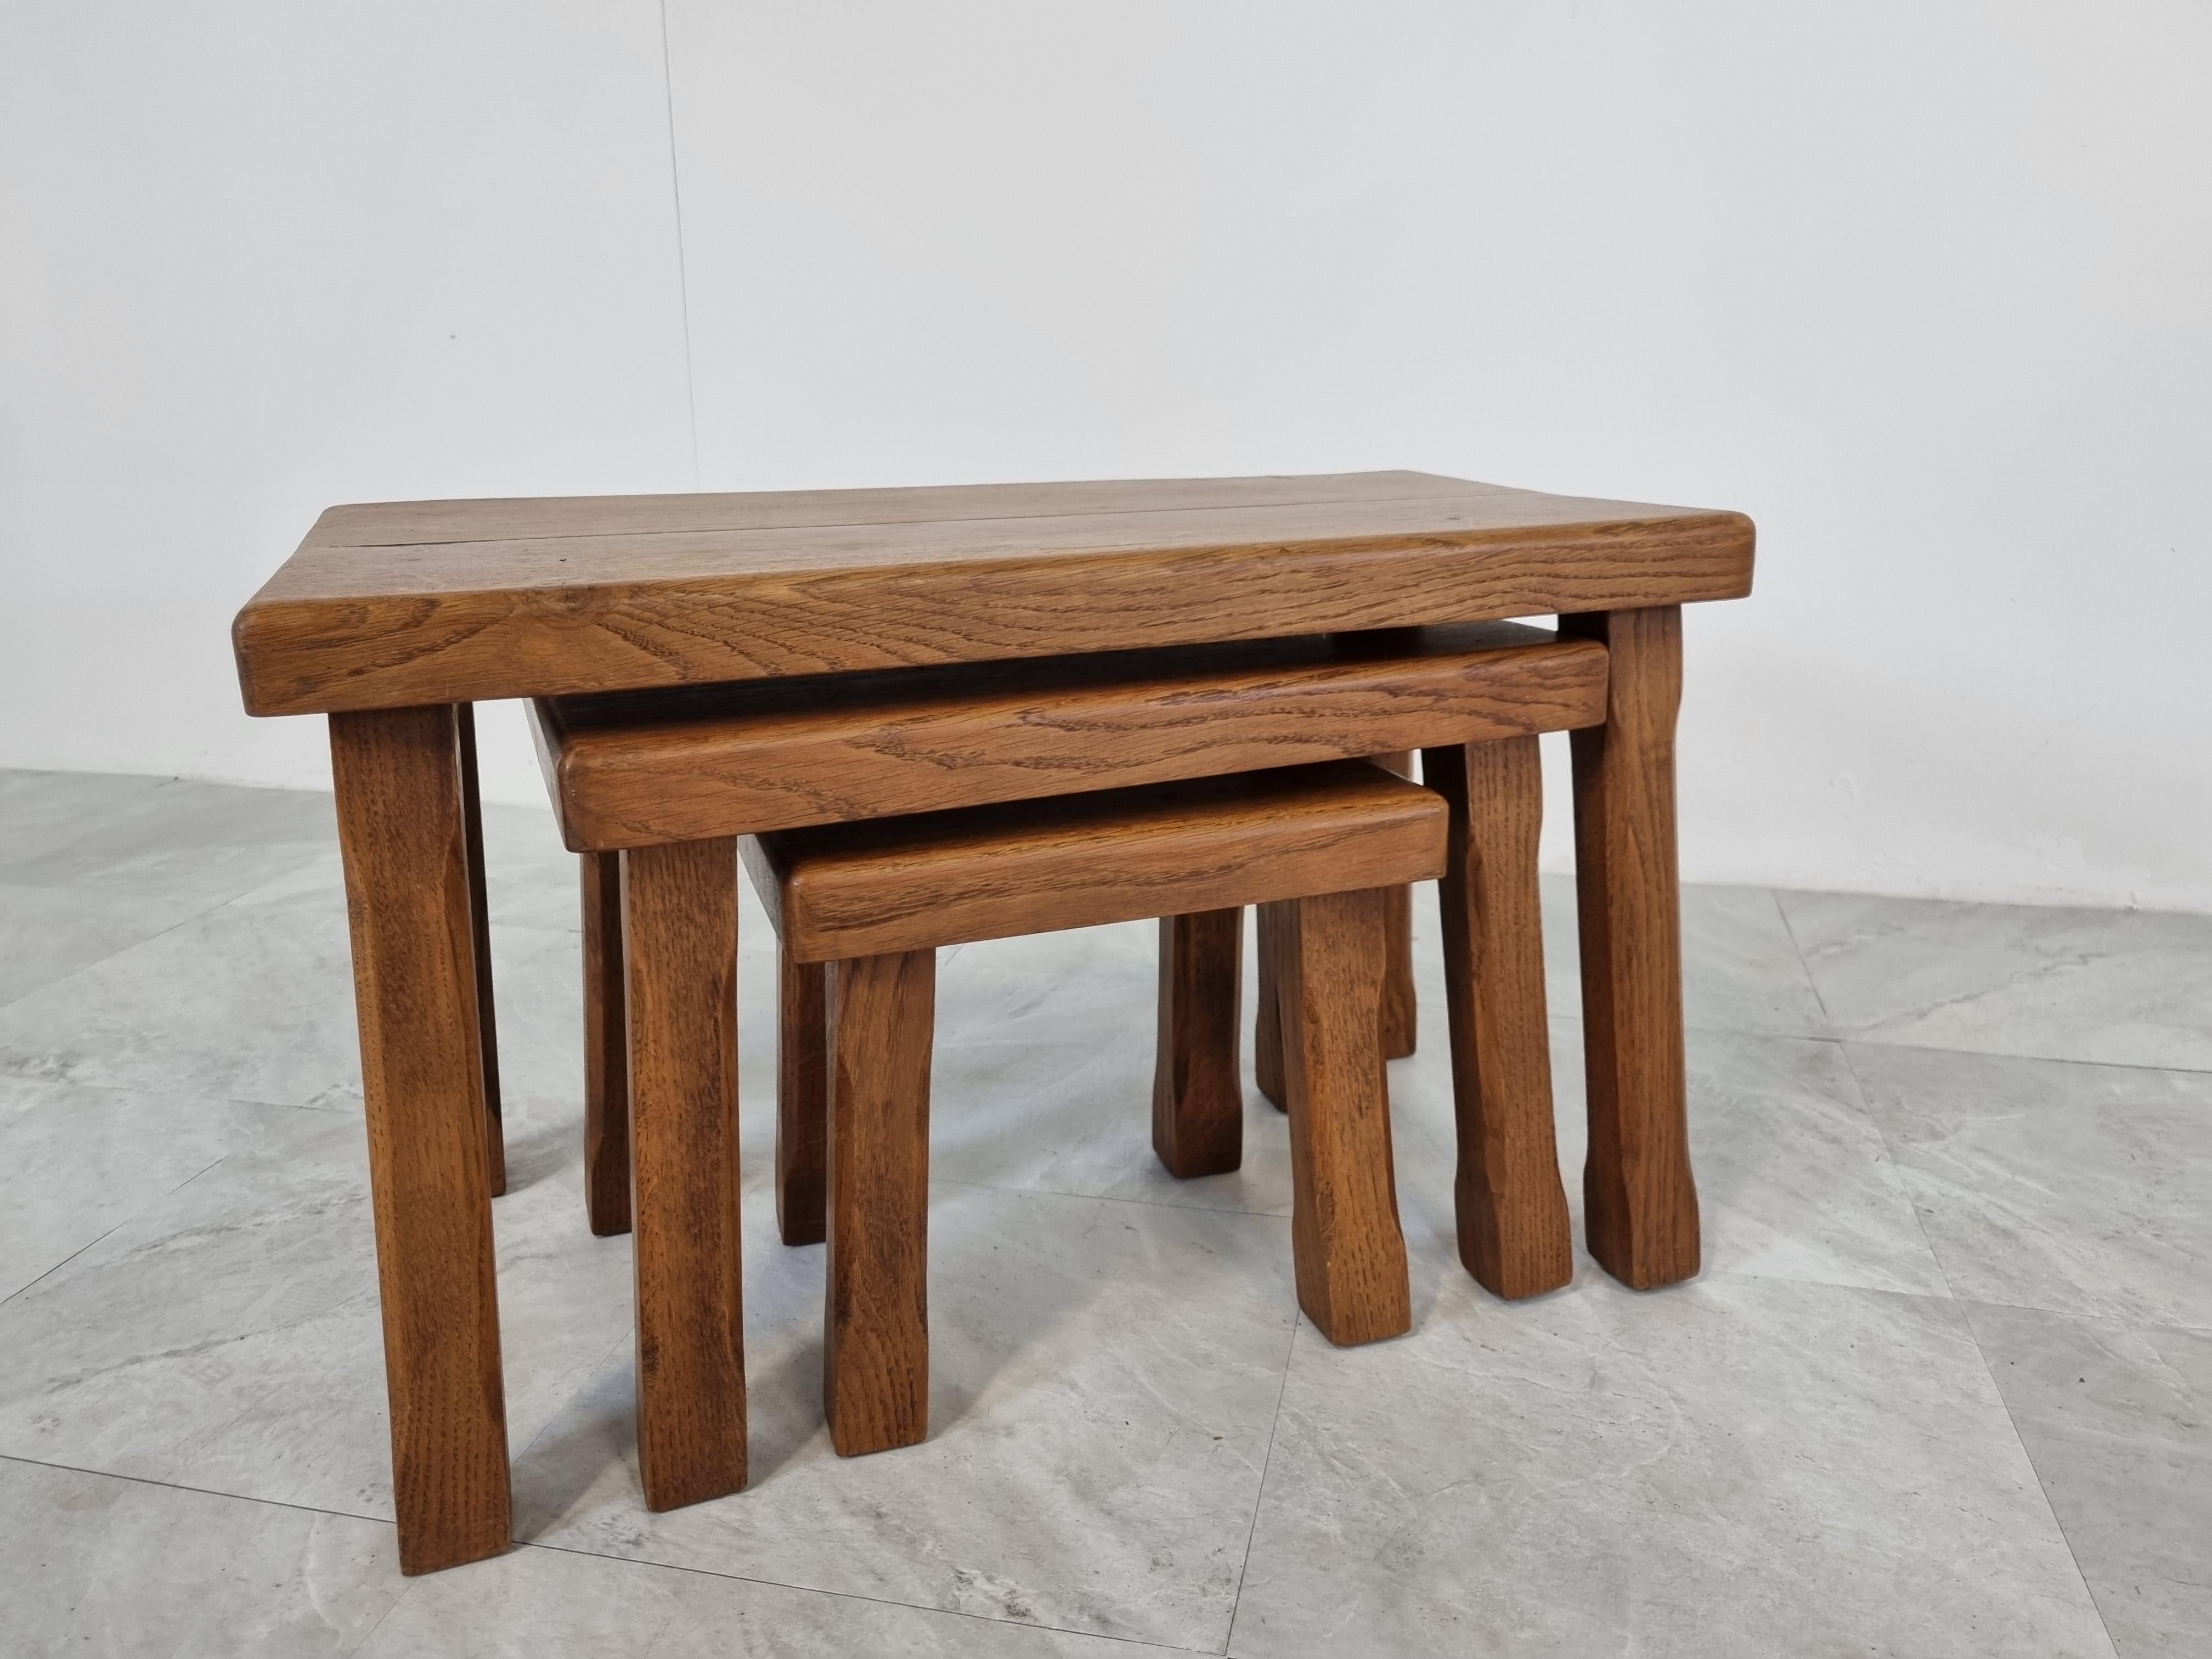 Lovely set of brutalist oak nesting tables.

Rustic and robuste design.

1960s - Belgium

Good condition

Dimensions of the largest table:

Height: 37cm/14.56